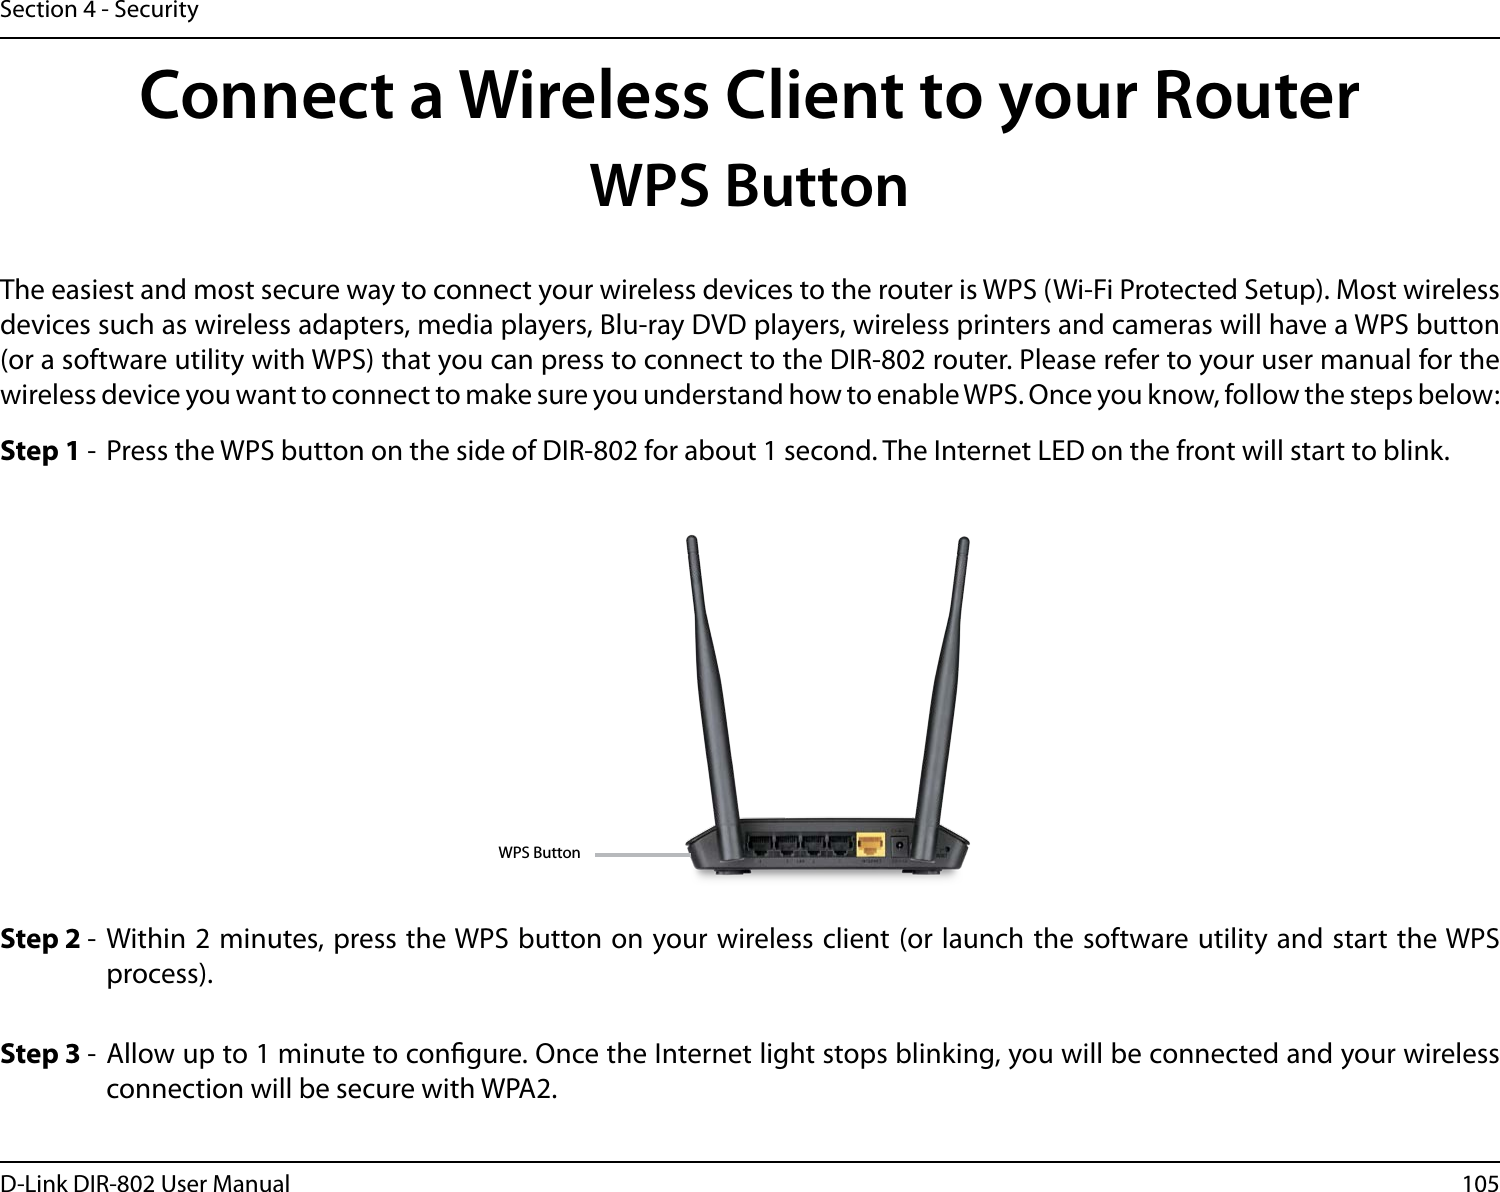 105D-Link DIR-802 User ManualSection 4 - SecurityConnect a Wireless Client to your RouterWPS ButtonStep 2 -  Within 2 minutes, press the WPS button on your wireless client (or launch the software utility and start the WPS process).The easiest and most secure way to connect your wireless devices to the router is WPS (Wi-Fi Protected Setup). Most wireless devices such as wireless adapters, media players, Blu-ray DVD players, wireless printers and cameras will have a WPS button (or a software utility with WPS) that you can press to connect to the DIR-802 router. Please refer to your user manual for the wireless device you want to connect to make sure you understand how to enable WPS. Once you know, follow the steps below:Step 1 -  Press the WPS button on the side of DIR-802 for about 1 second. The Internet LED on the front will start to blink.Step 3 -  Allow up to 1 minute to congure. Once the Internet light stops blinking, you will be connected and your wireless connection will be secure with WPA2.WPS Button